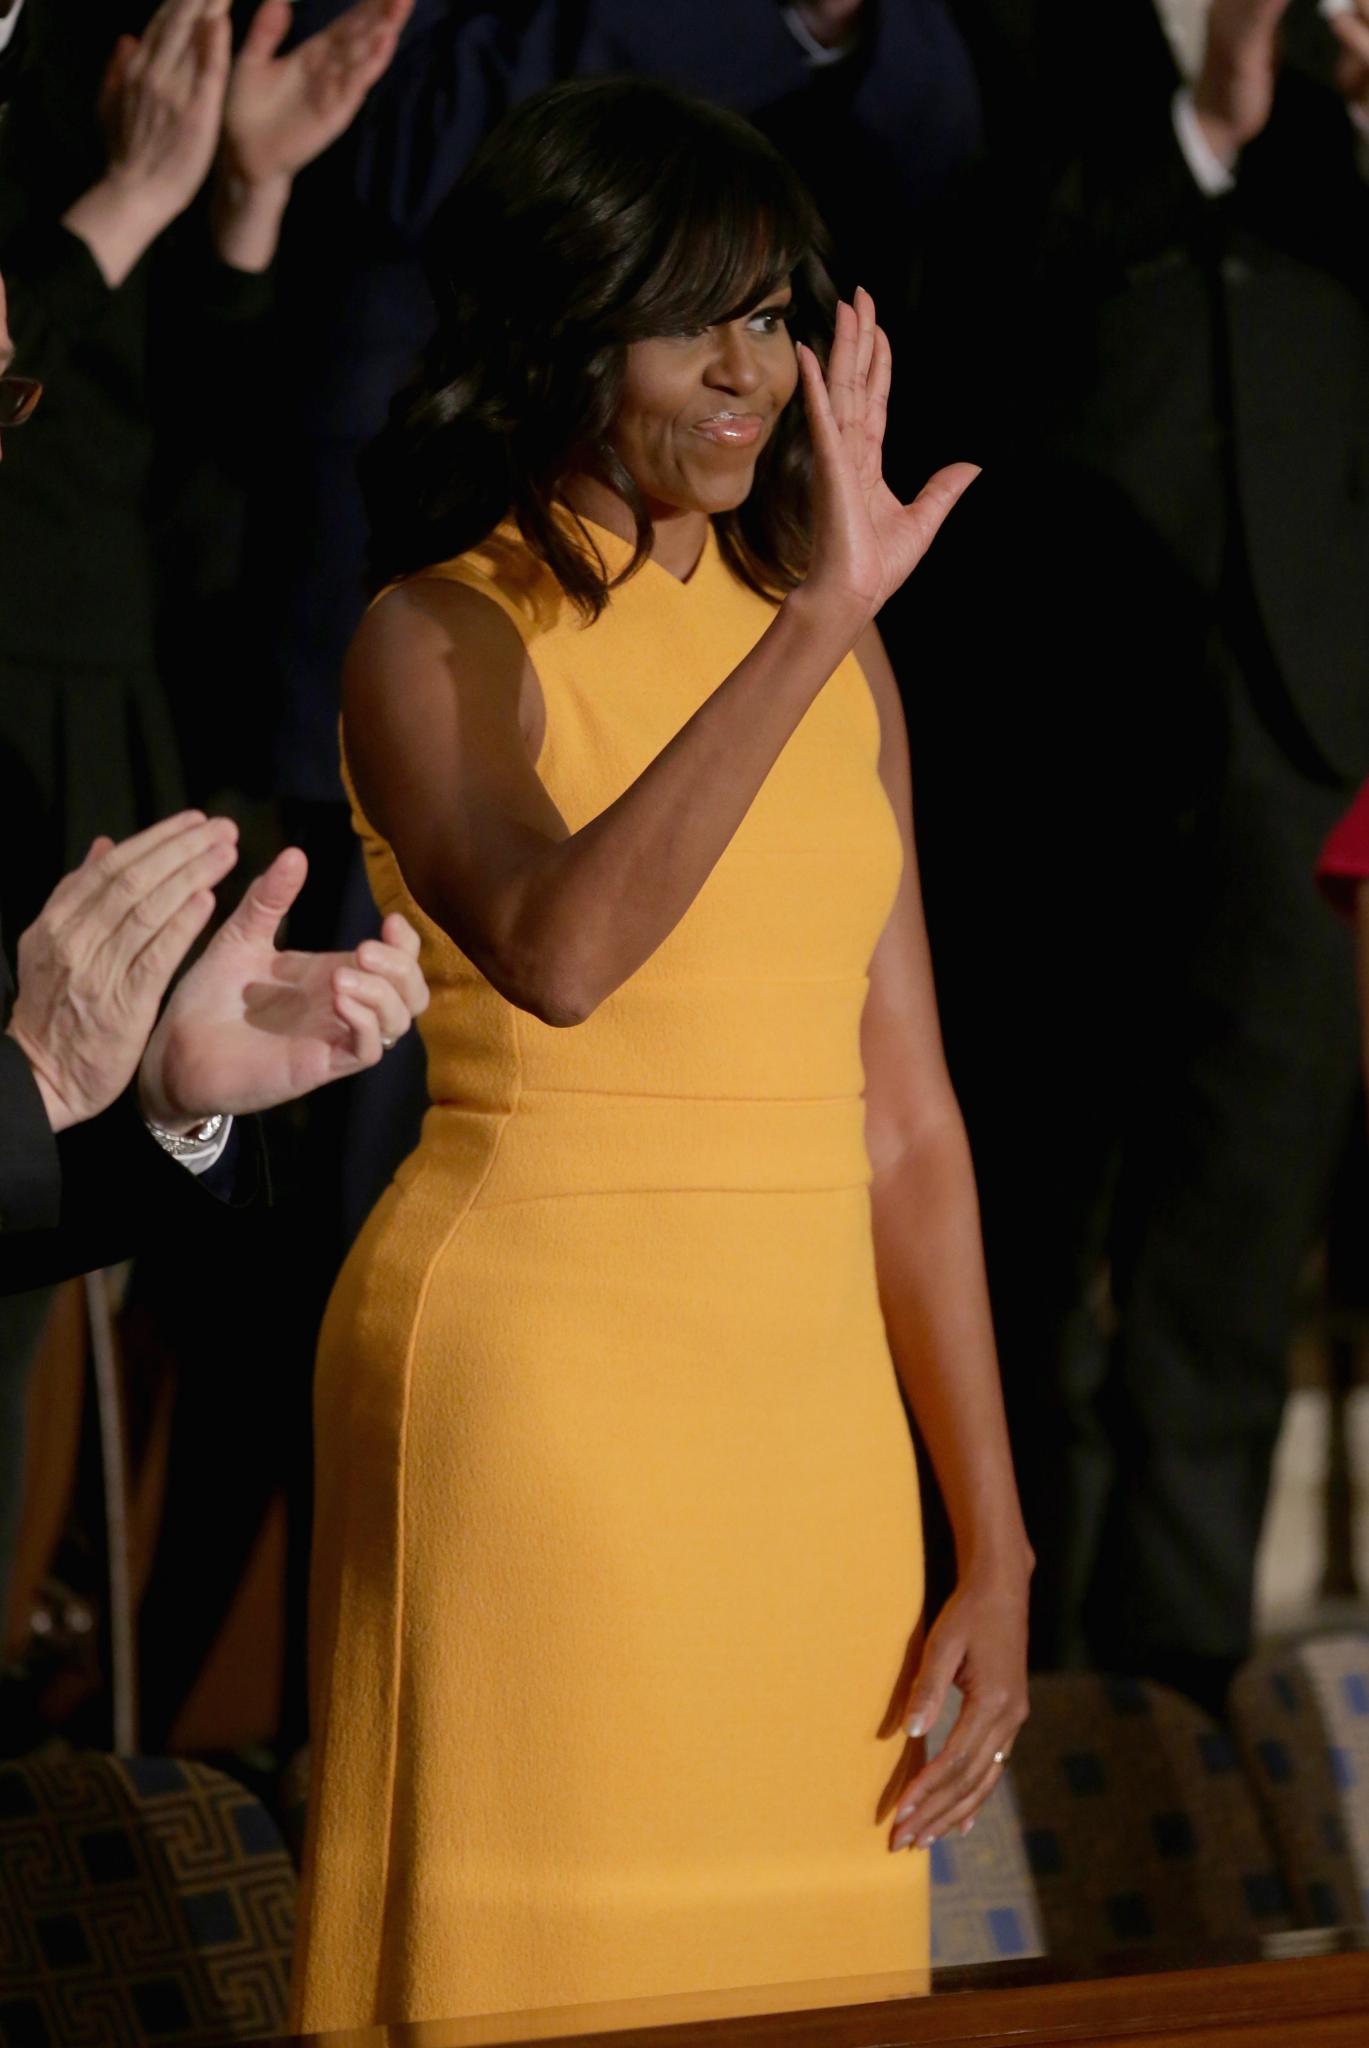 Michelle Obama's State of the Union Narciso Rodriguez Dress Stole the Show
